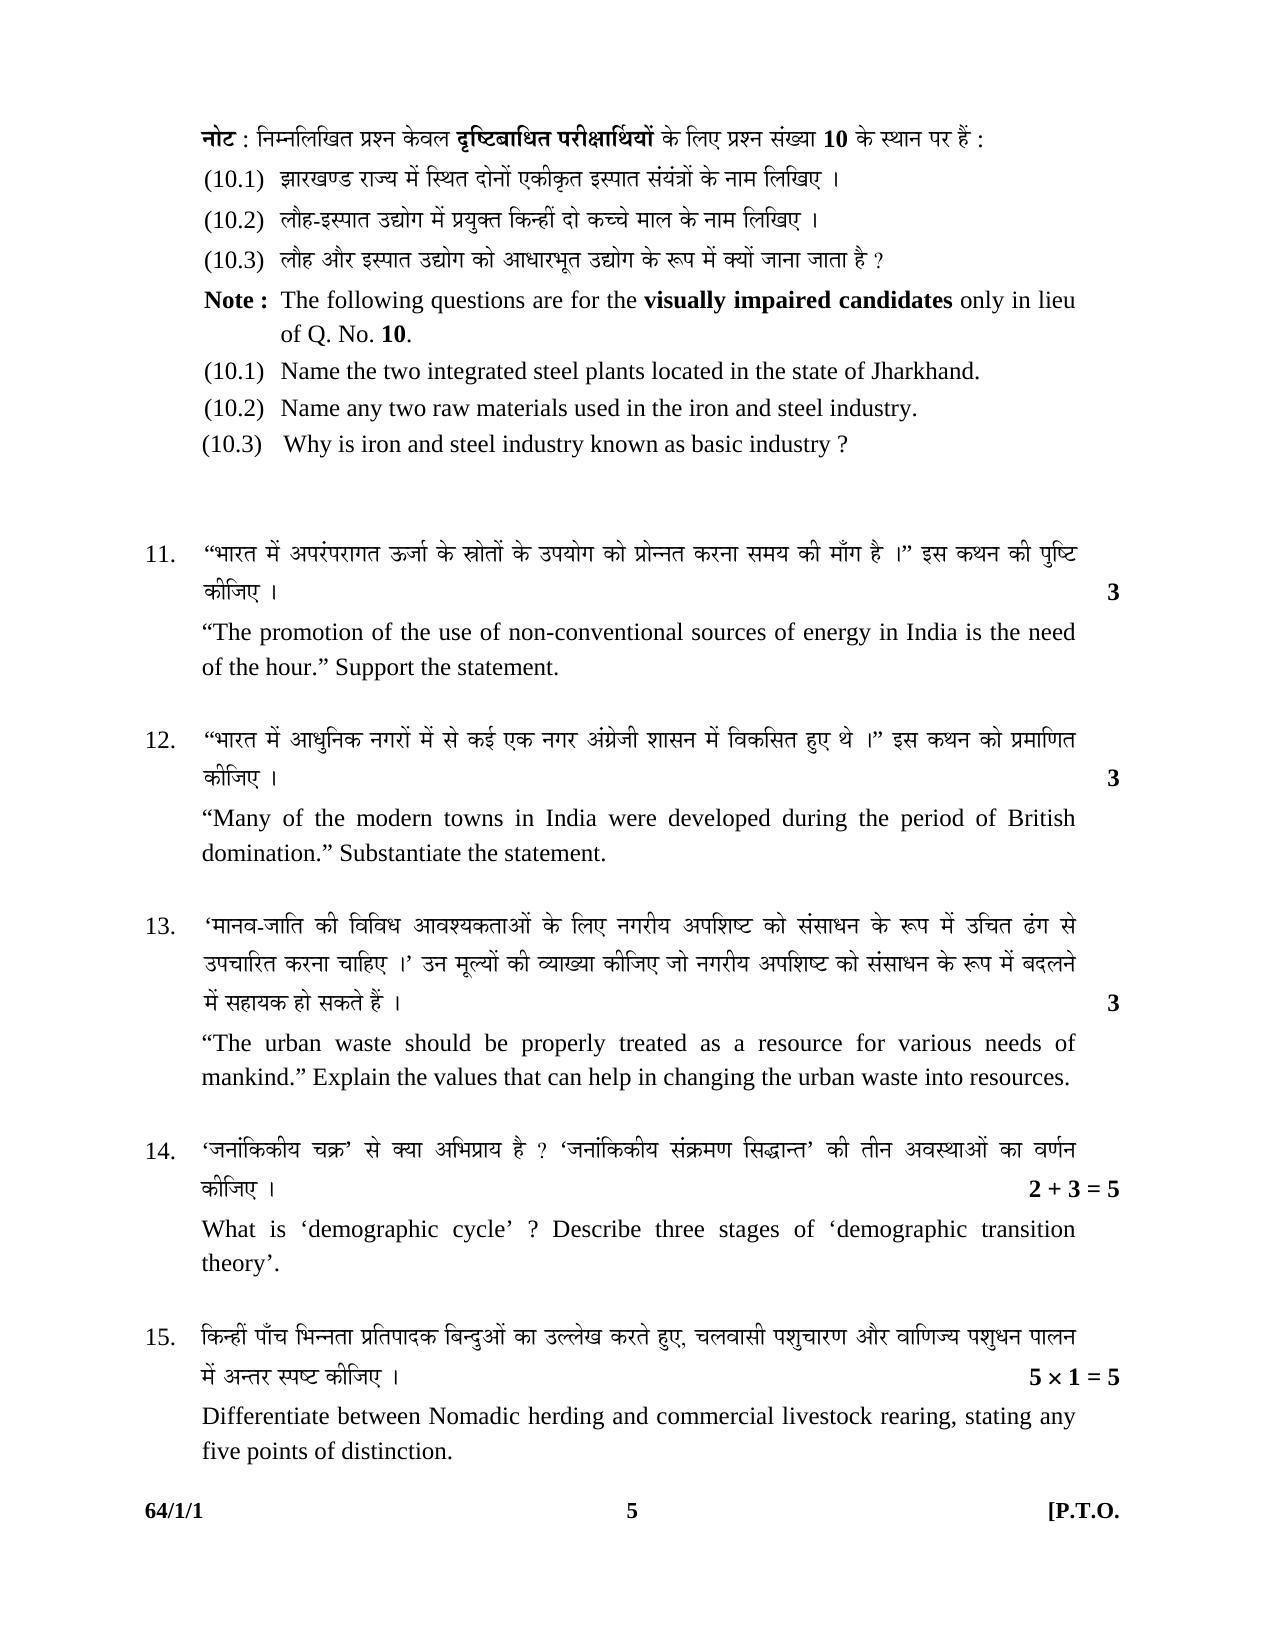 CBSE Class 12 64-1-1 GEOGRAPHY 2016 Question Paper - Page 5